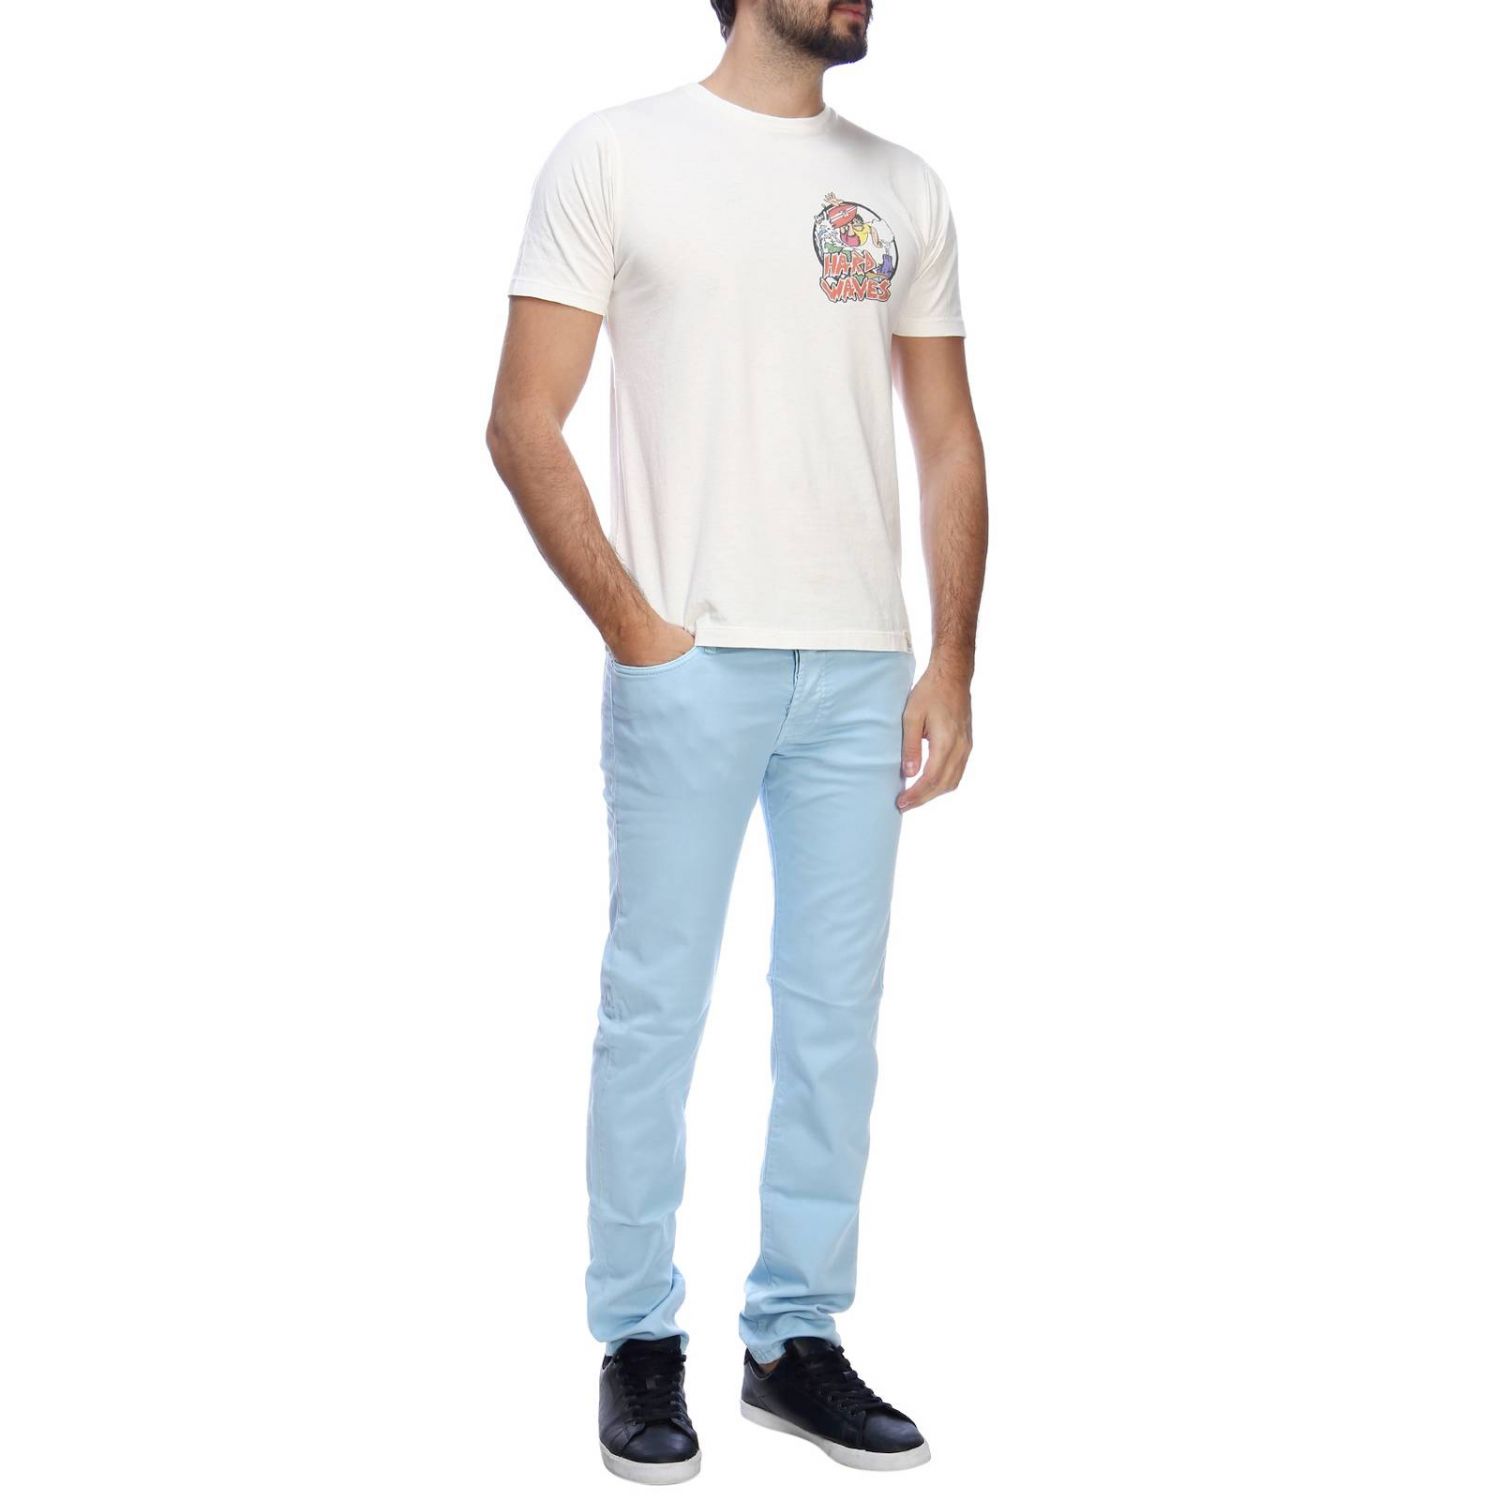 Roy Rogers Outlet: T-shirt men - White | T-Shirt Roy Rogers ...